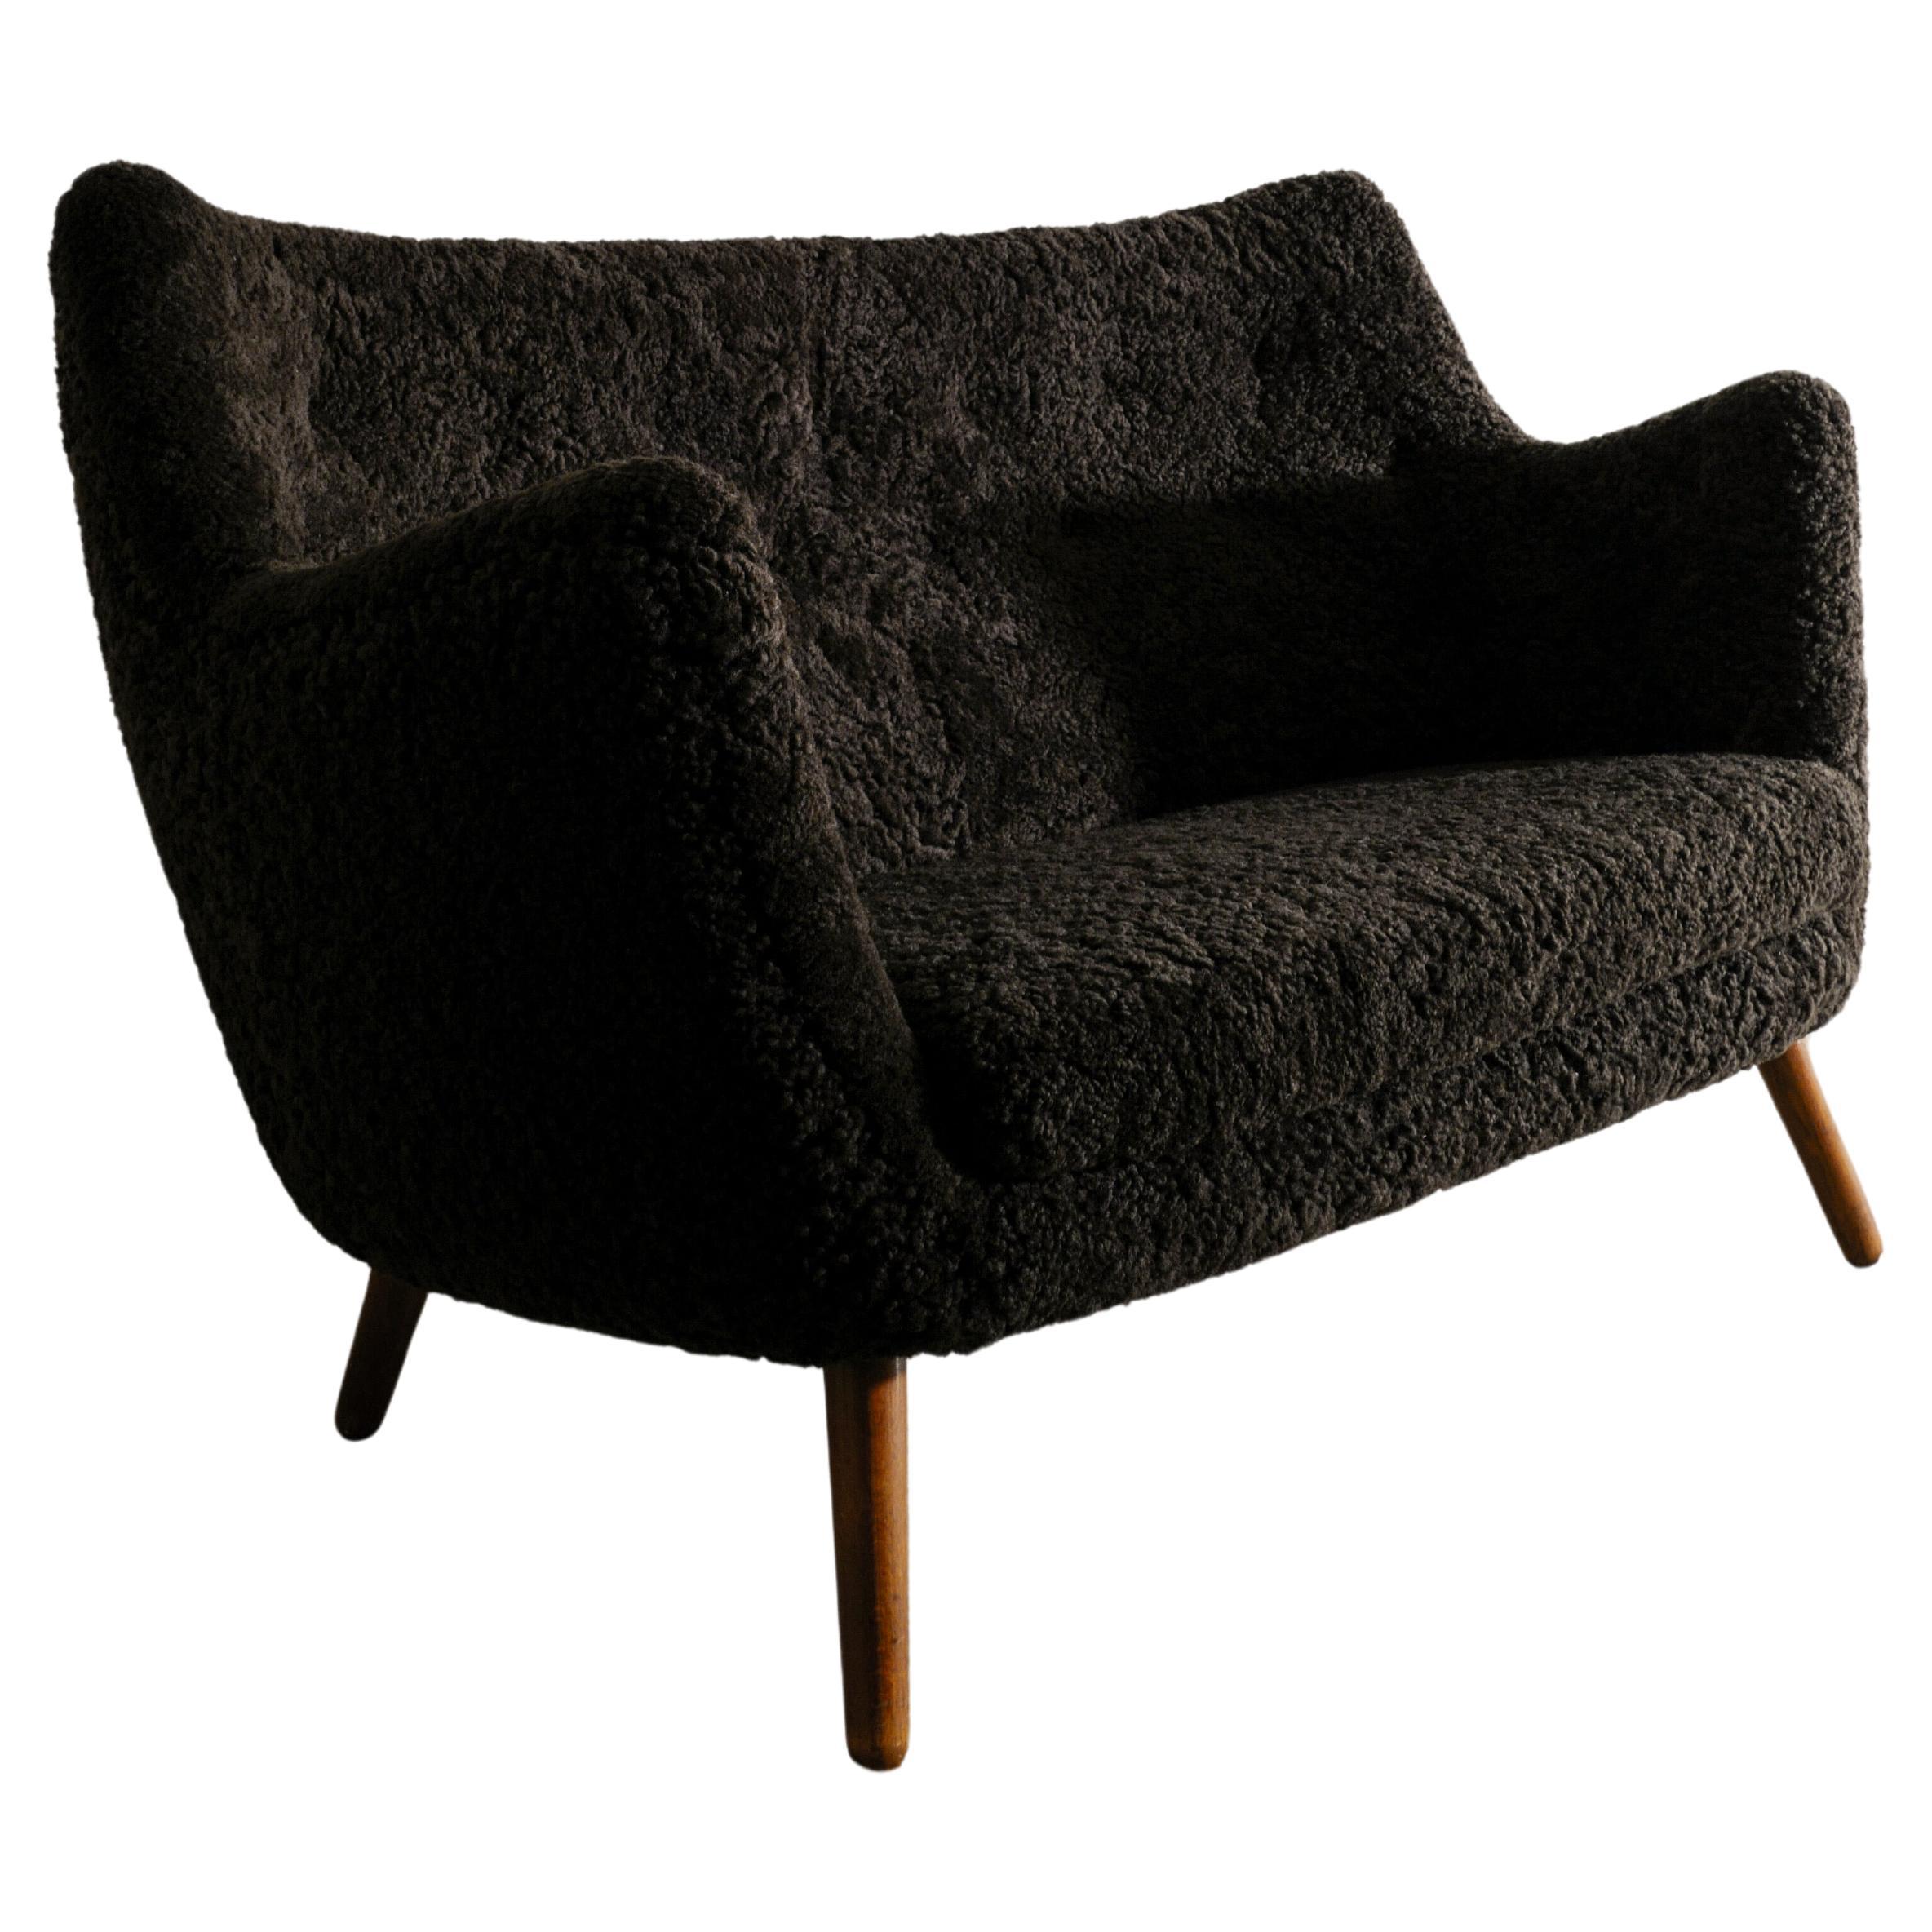 Danish Curved Mid Century Poet Sofa by Finn Juhl Produced by Niels Vodder, 1941  For Sale